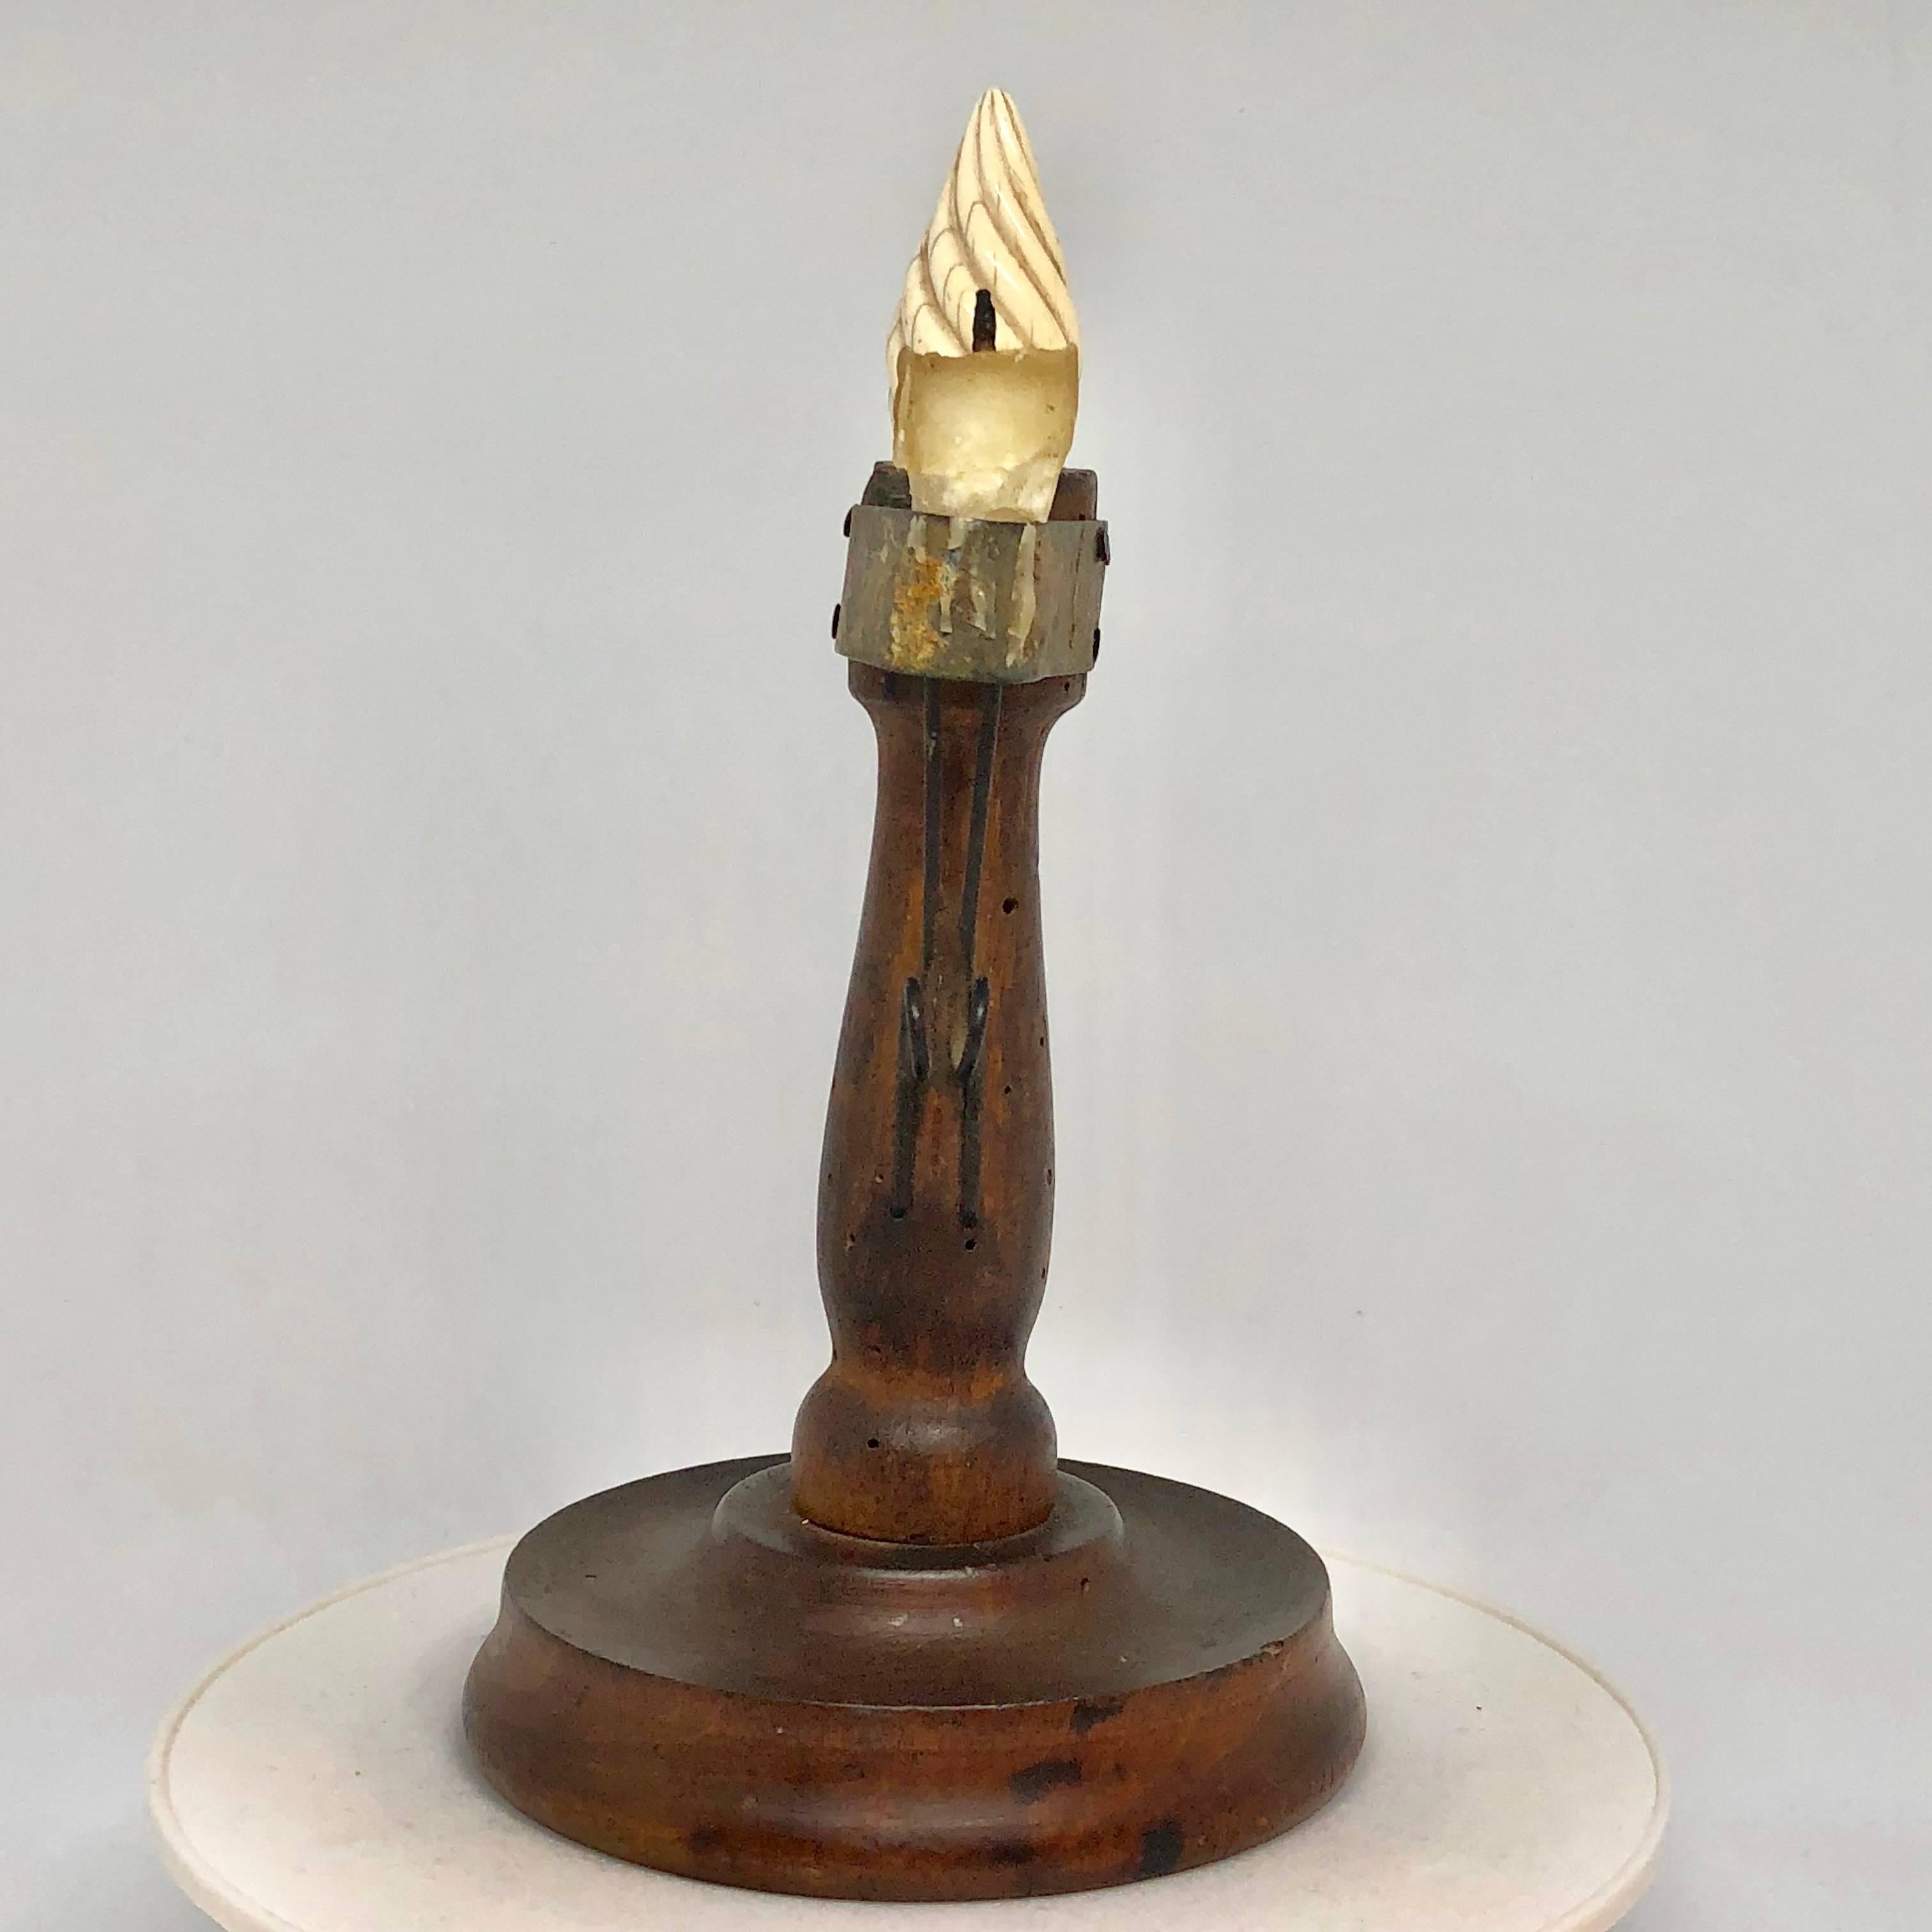 Hand-Crafted Early 19th Century Danish Folk Art Candlestick With Faux Flame Of Antler